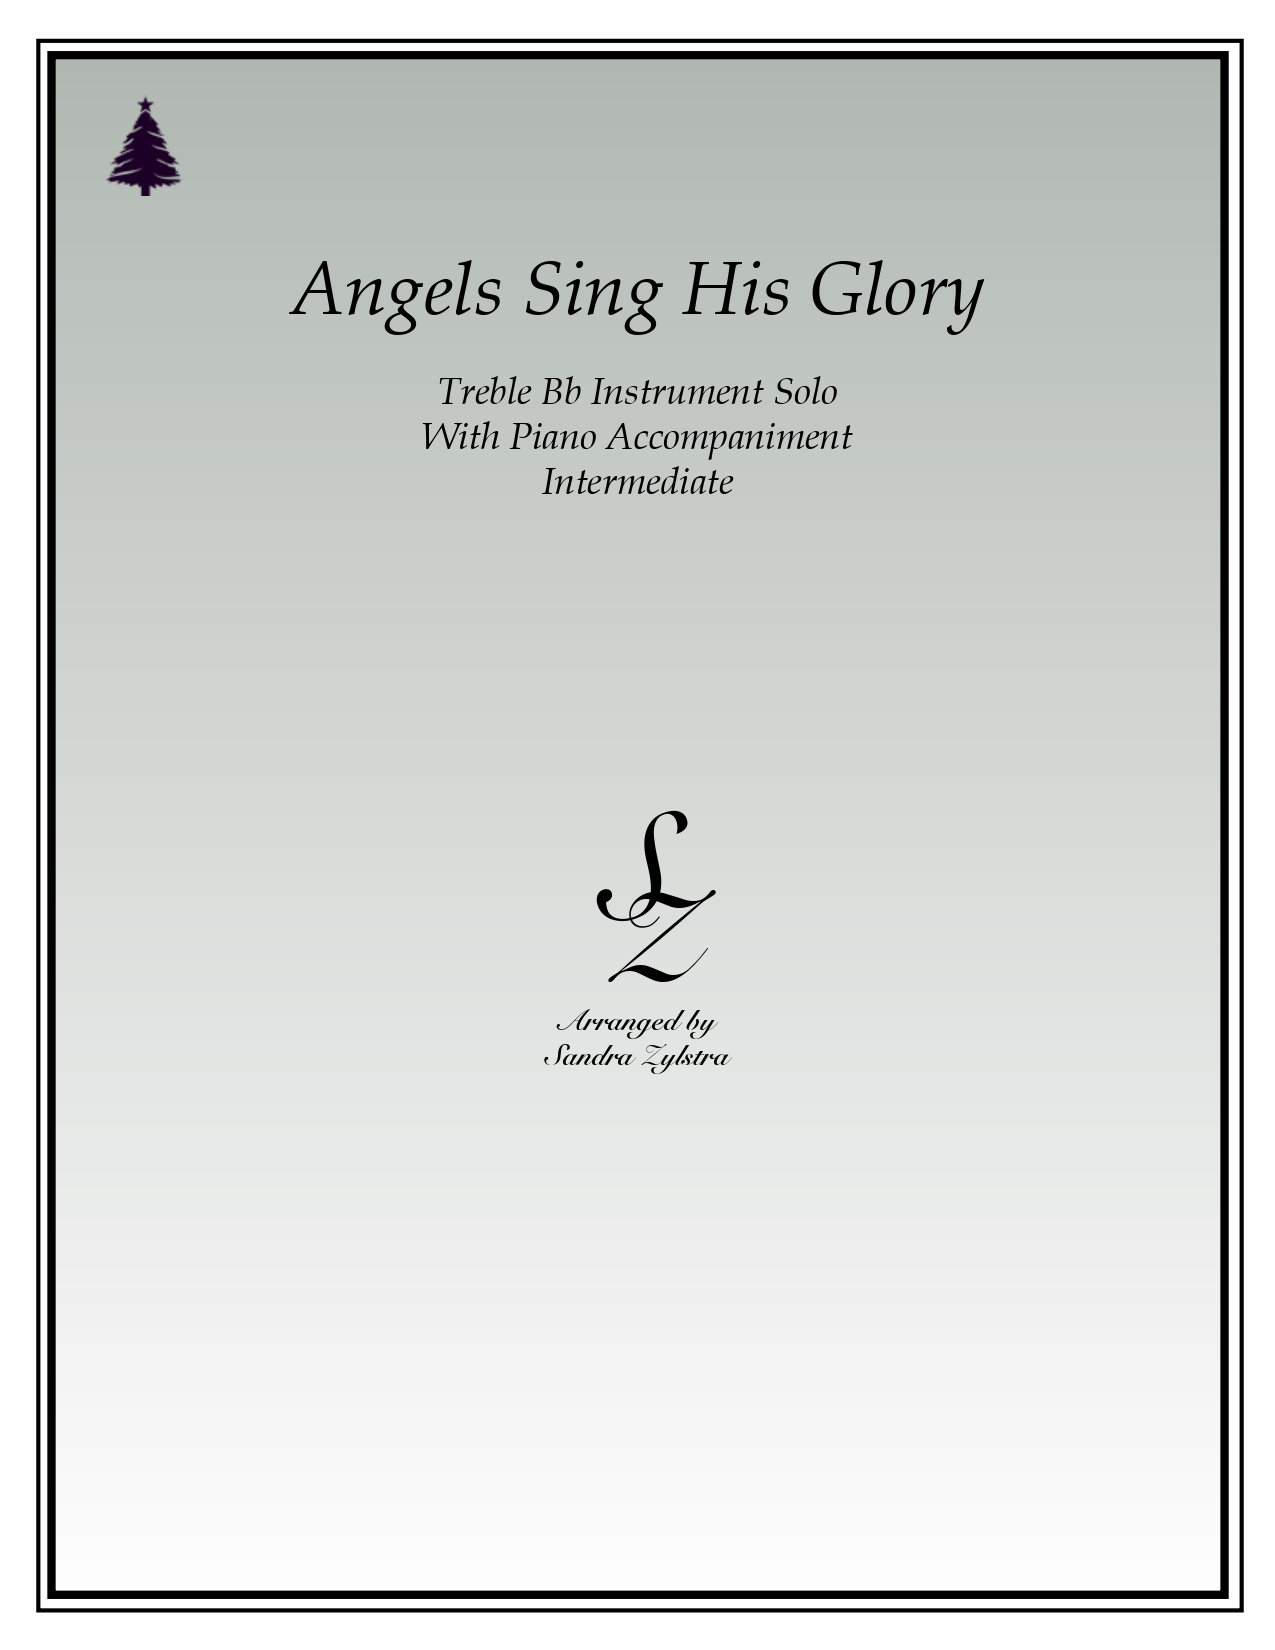 Angels Sing His Glory Bb instrument solo part cover page 00011